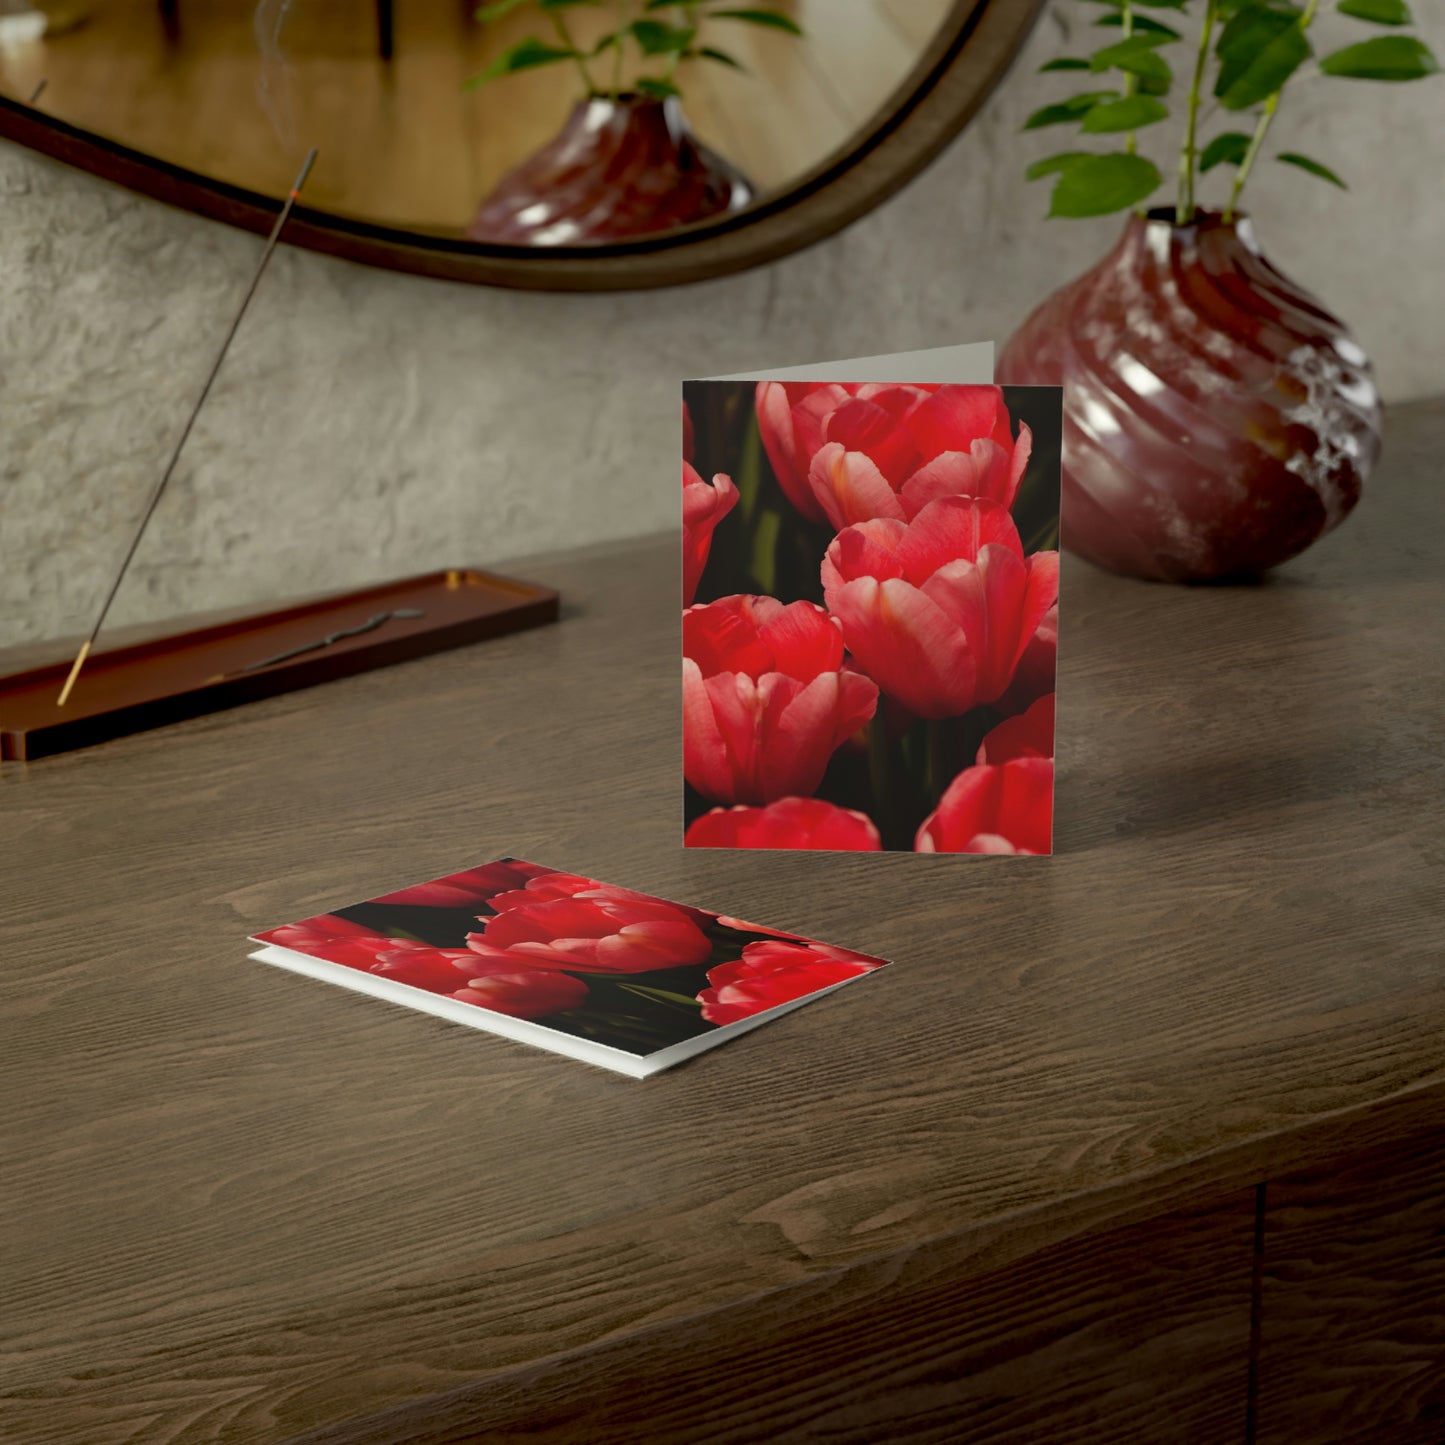 Flowers 07 Greeting Cards (1, 10, 30, and 50pcs)